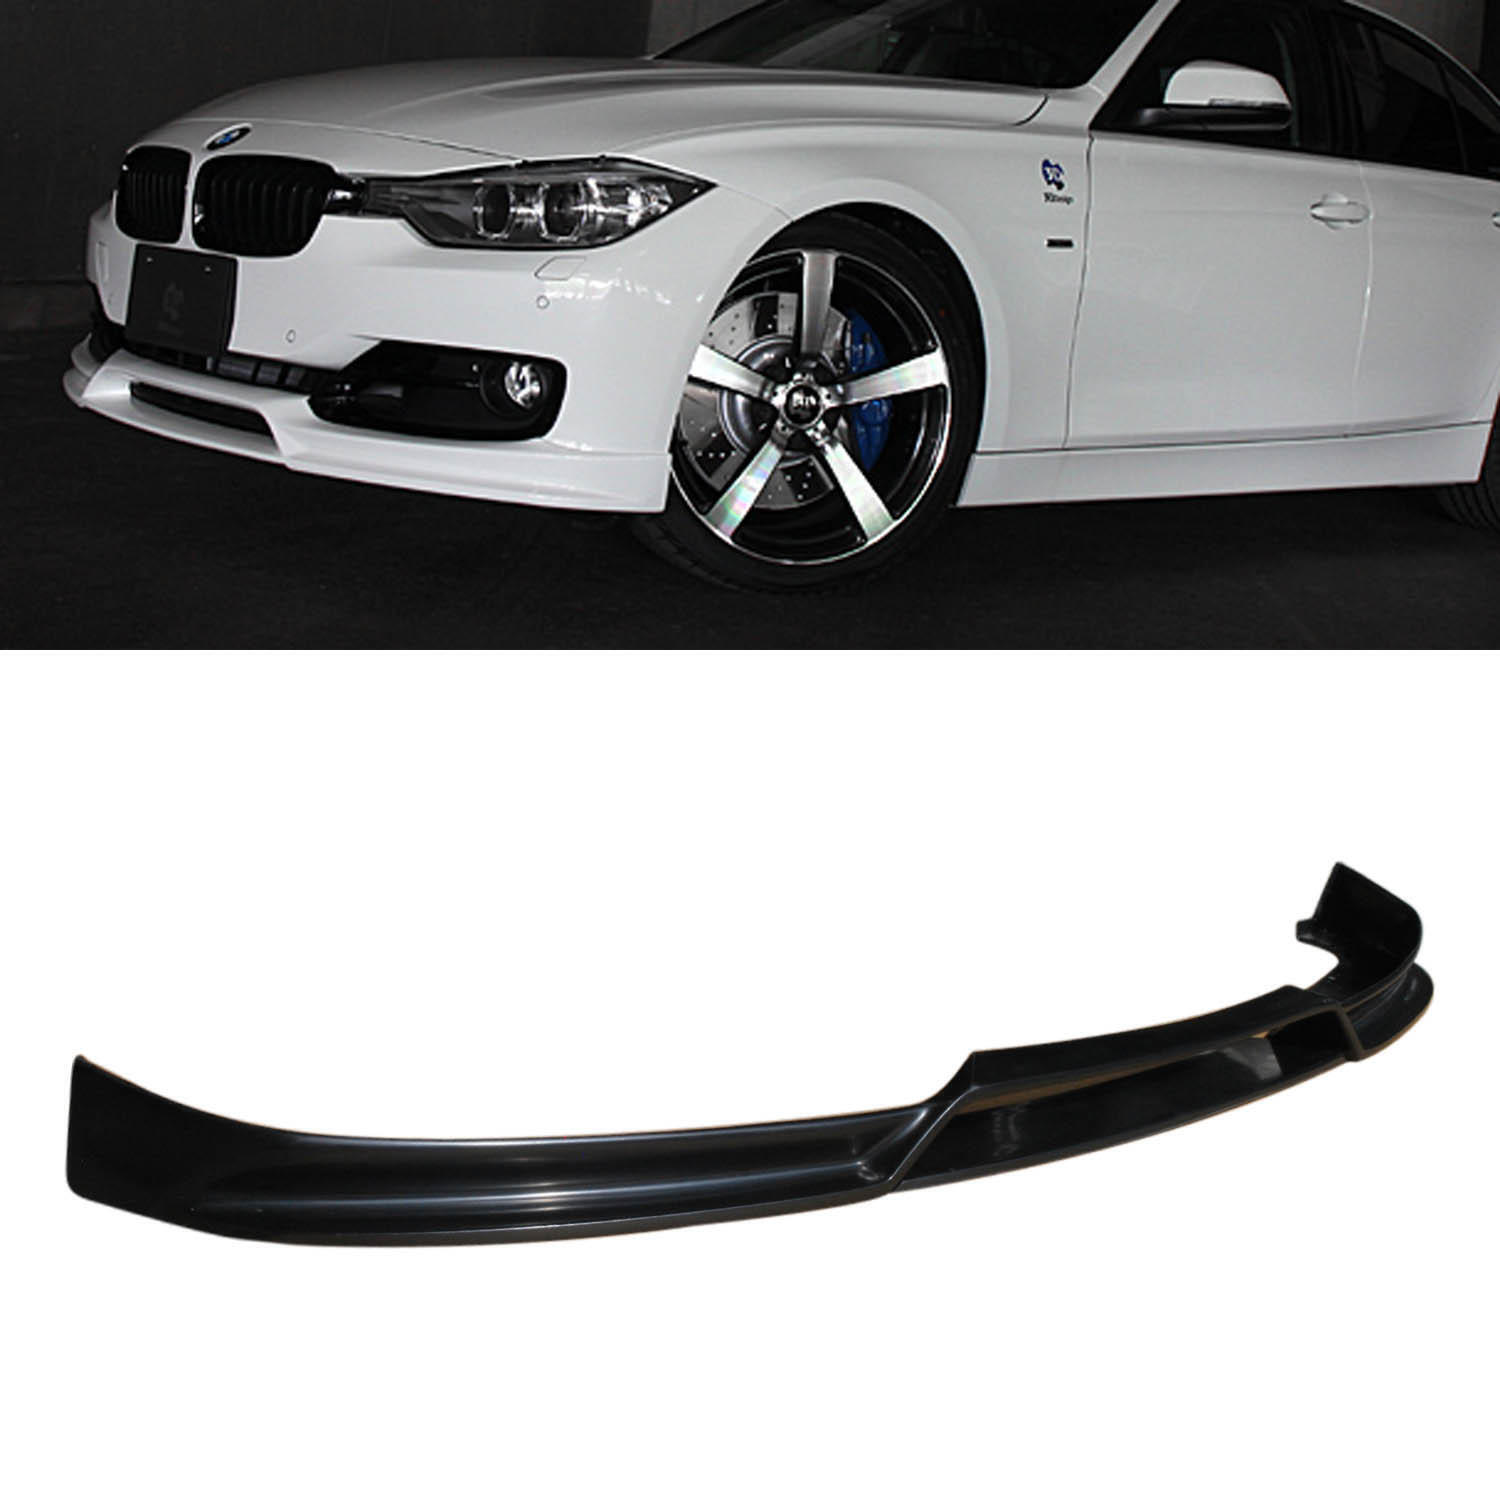 FOR 12-15 BMW F30 320i 328i 335i 3 SERIES TYPE-X PU FRONT BUMPER LIP SPOILER